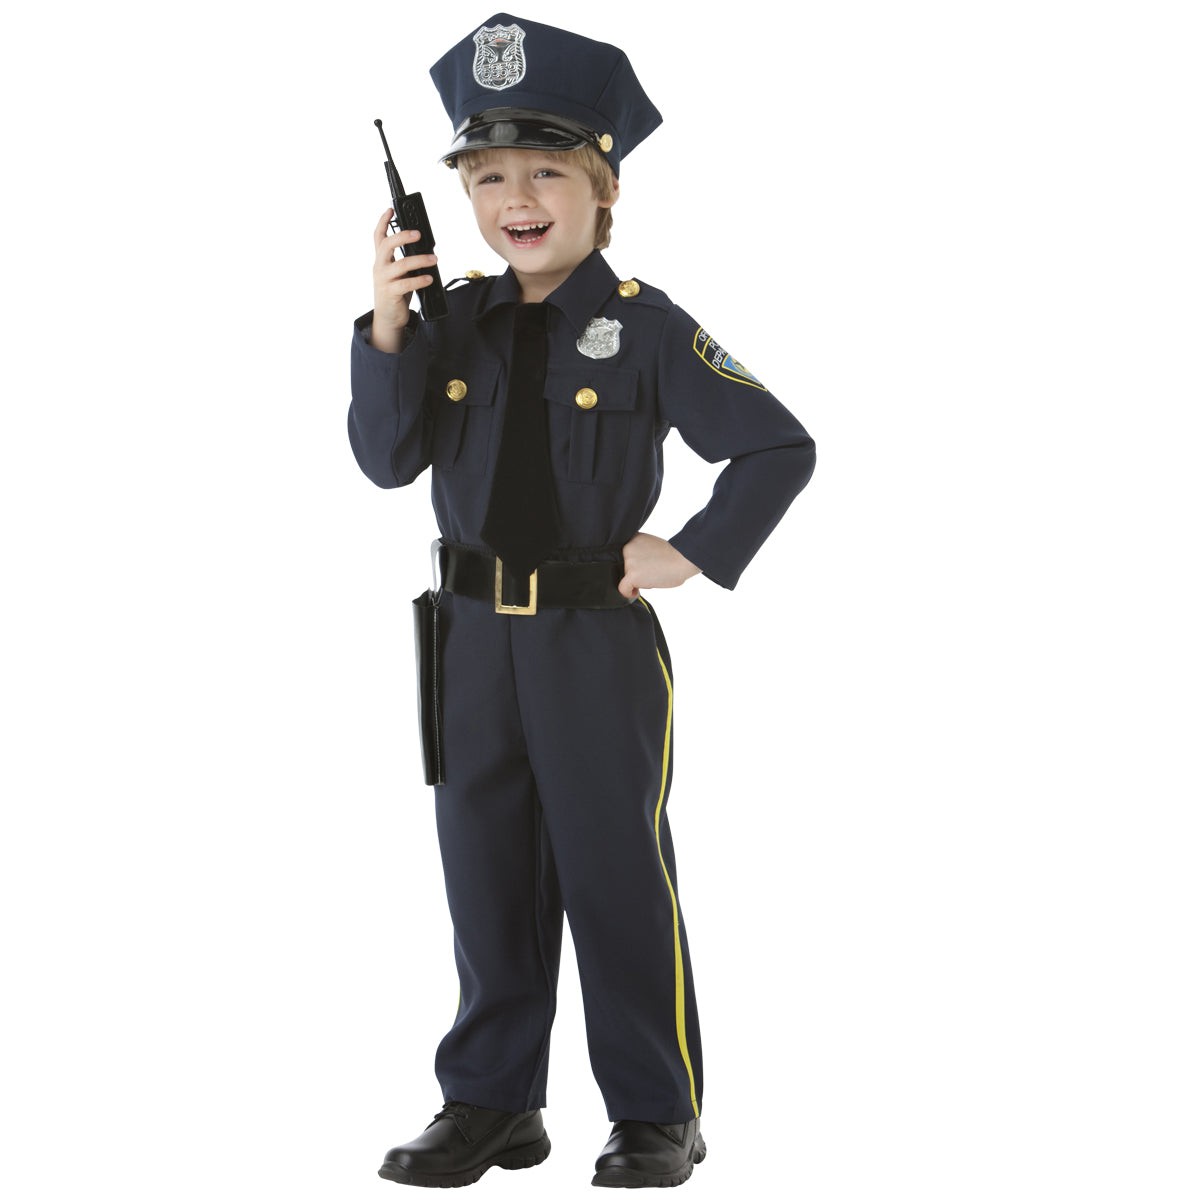 Police Officer Costume for Kids, Blue and Black Shirt and Pants